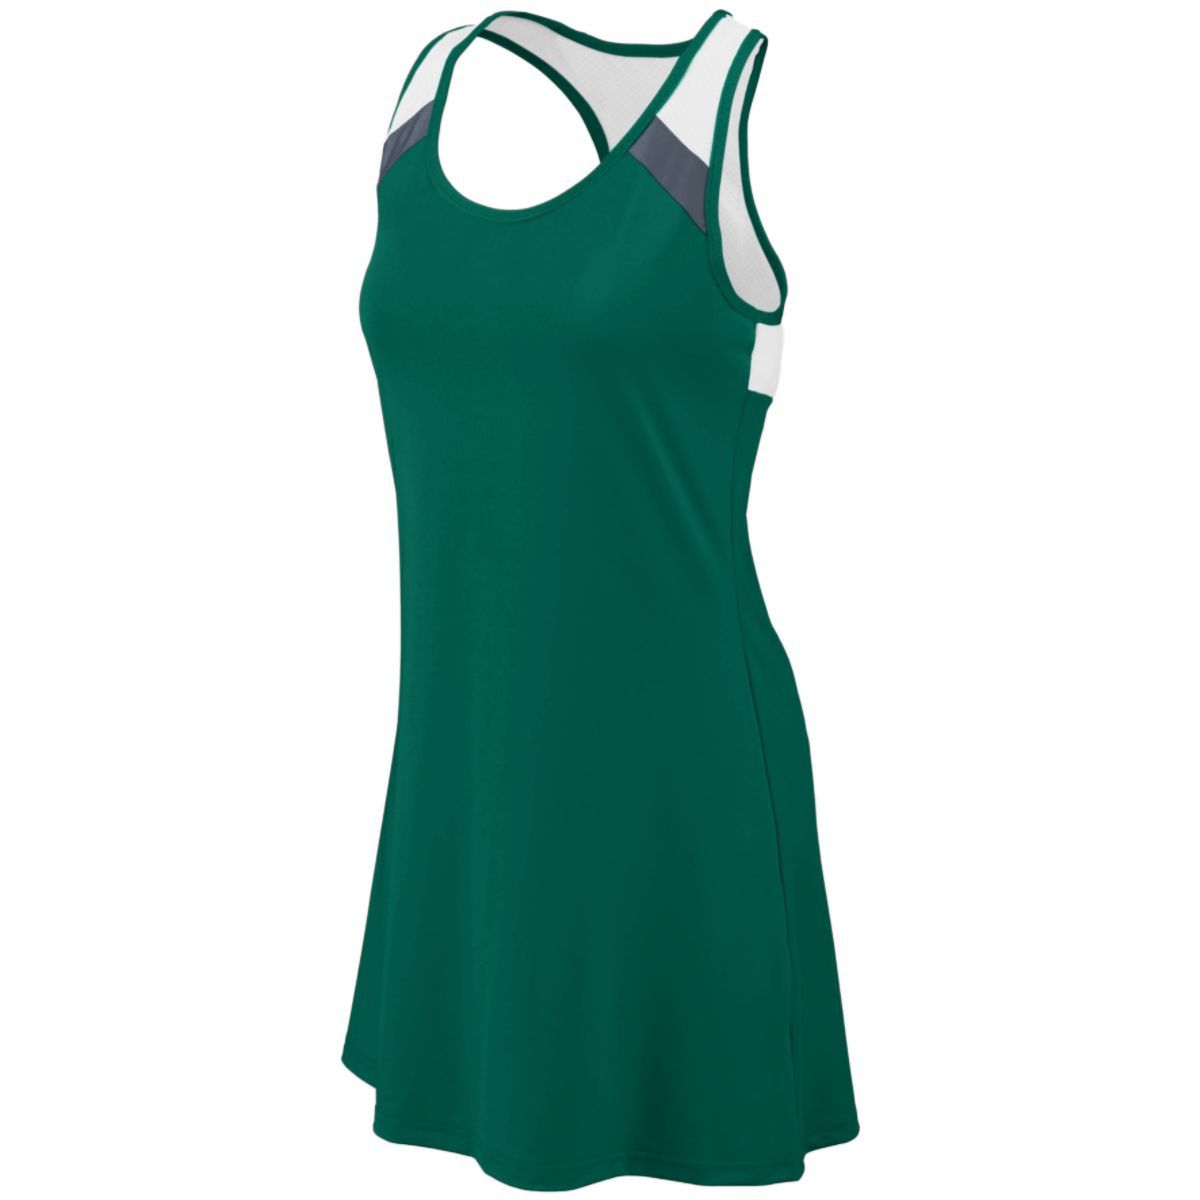 Augusta Sportswear Deuce Dress in Dark Green/Graphite/White  -Part of the Ladies, Augusta-Products, Tennis, Shirts product lines at KanaleyCreations.com